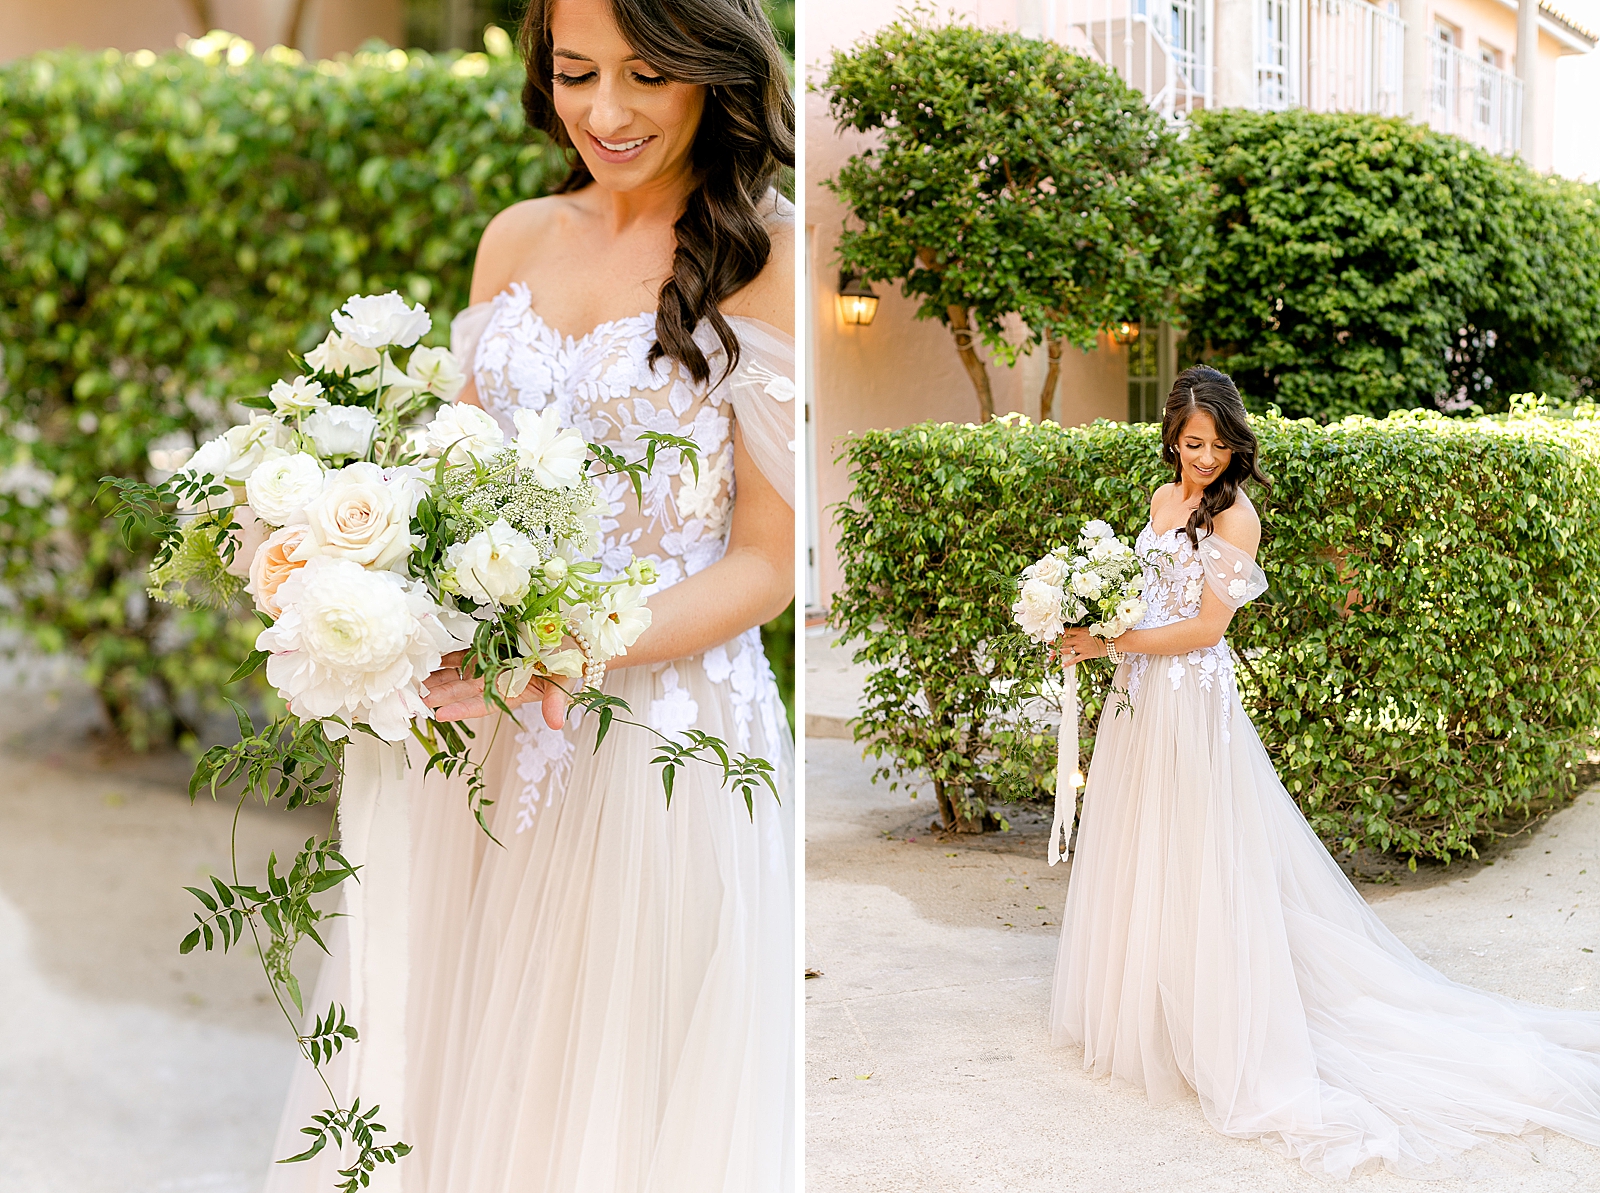 Bride holding white bouquet out in the courtyard